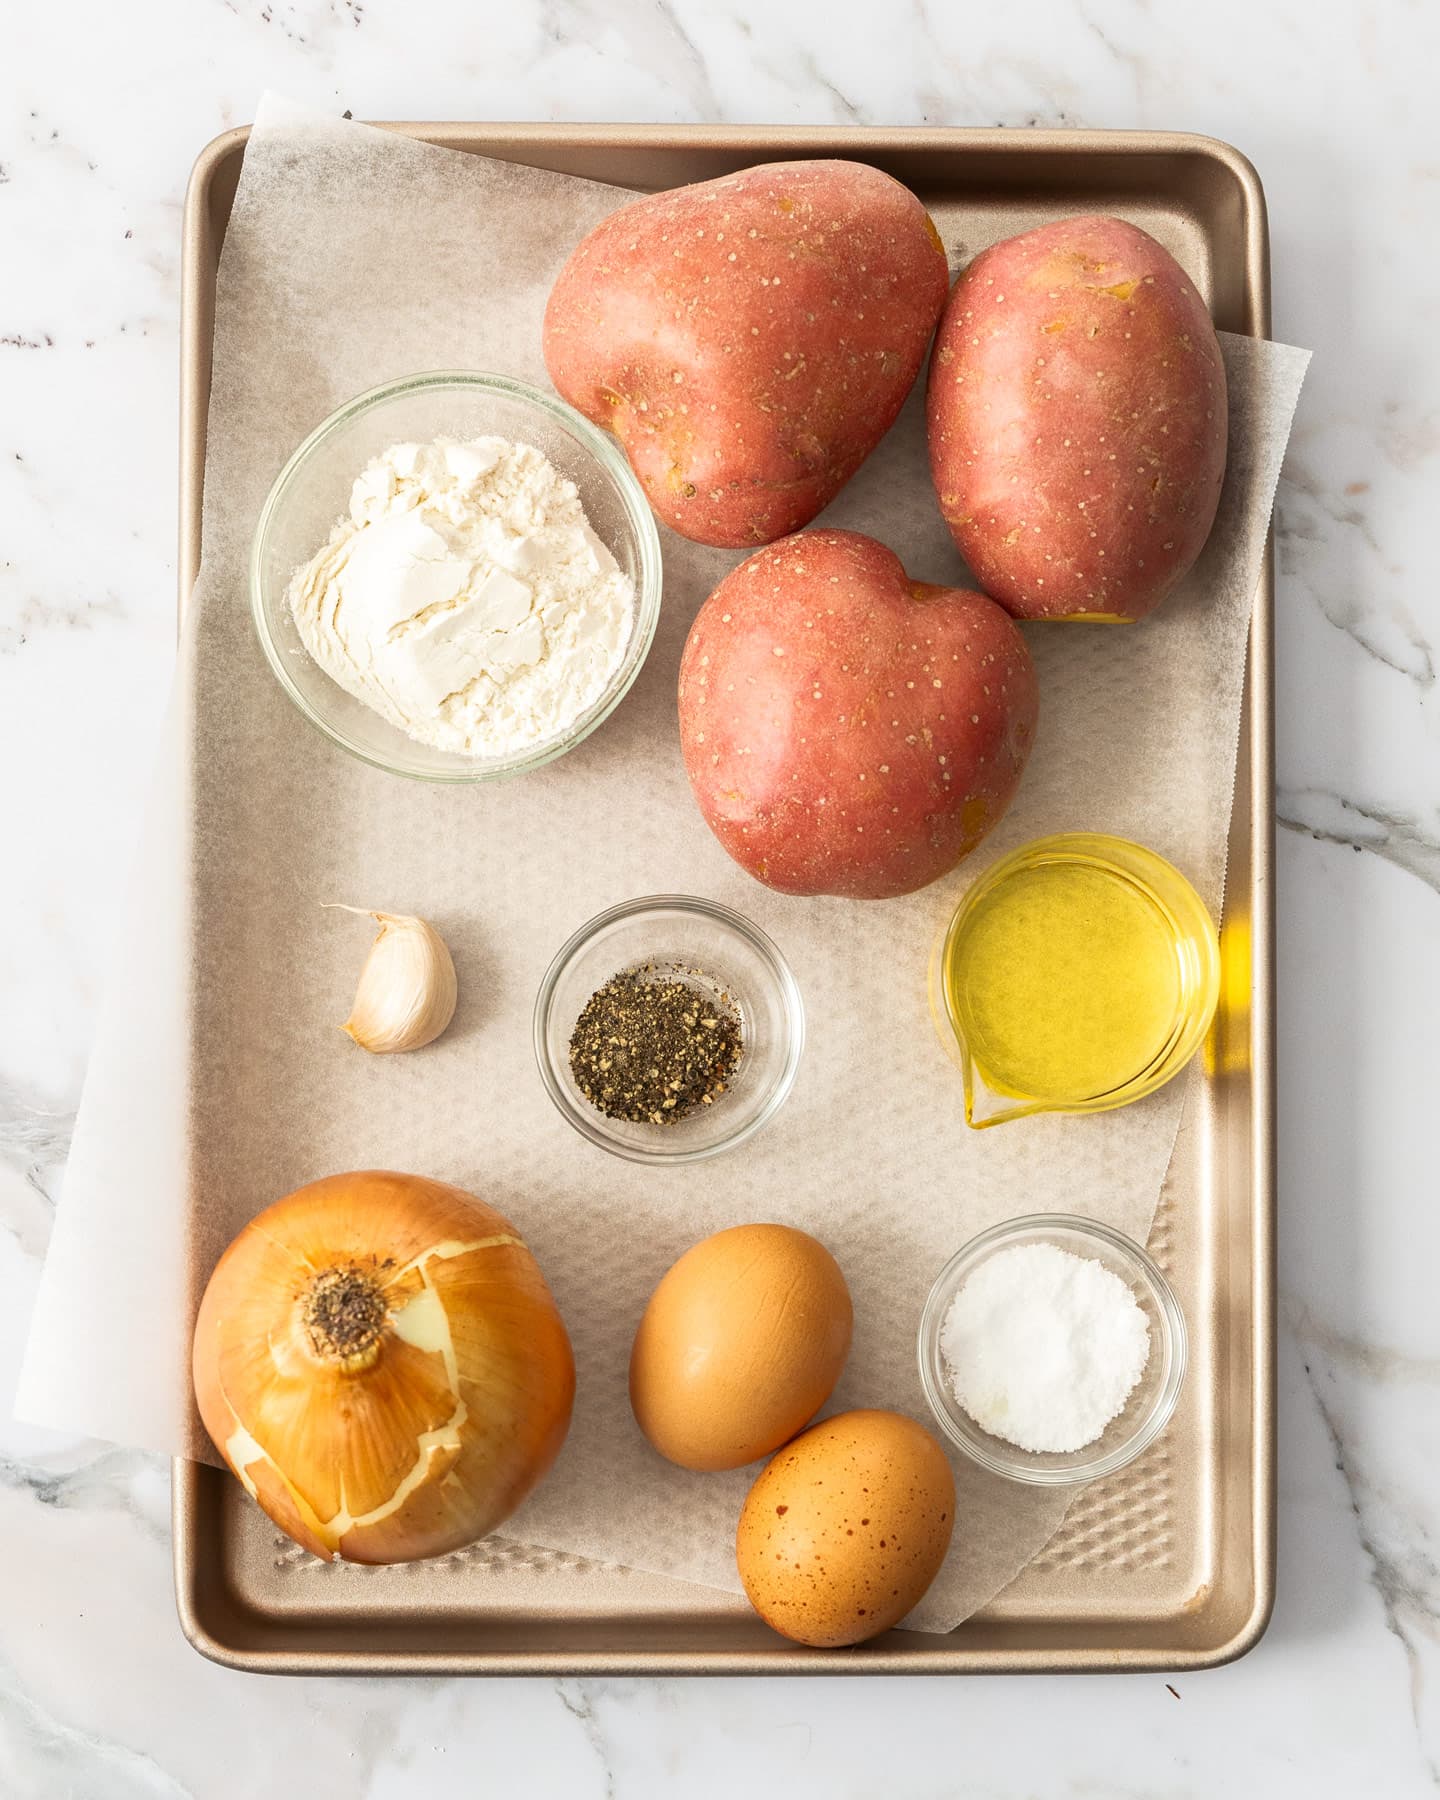 Ingredients for potato fritters on a baking tray.